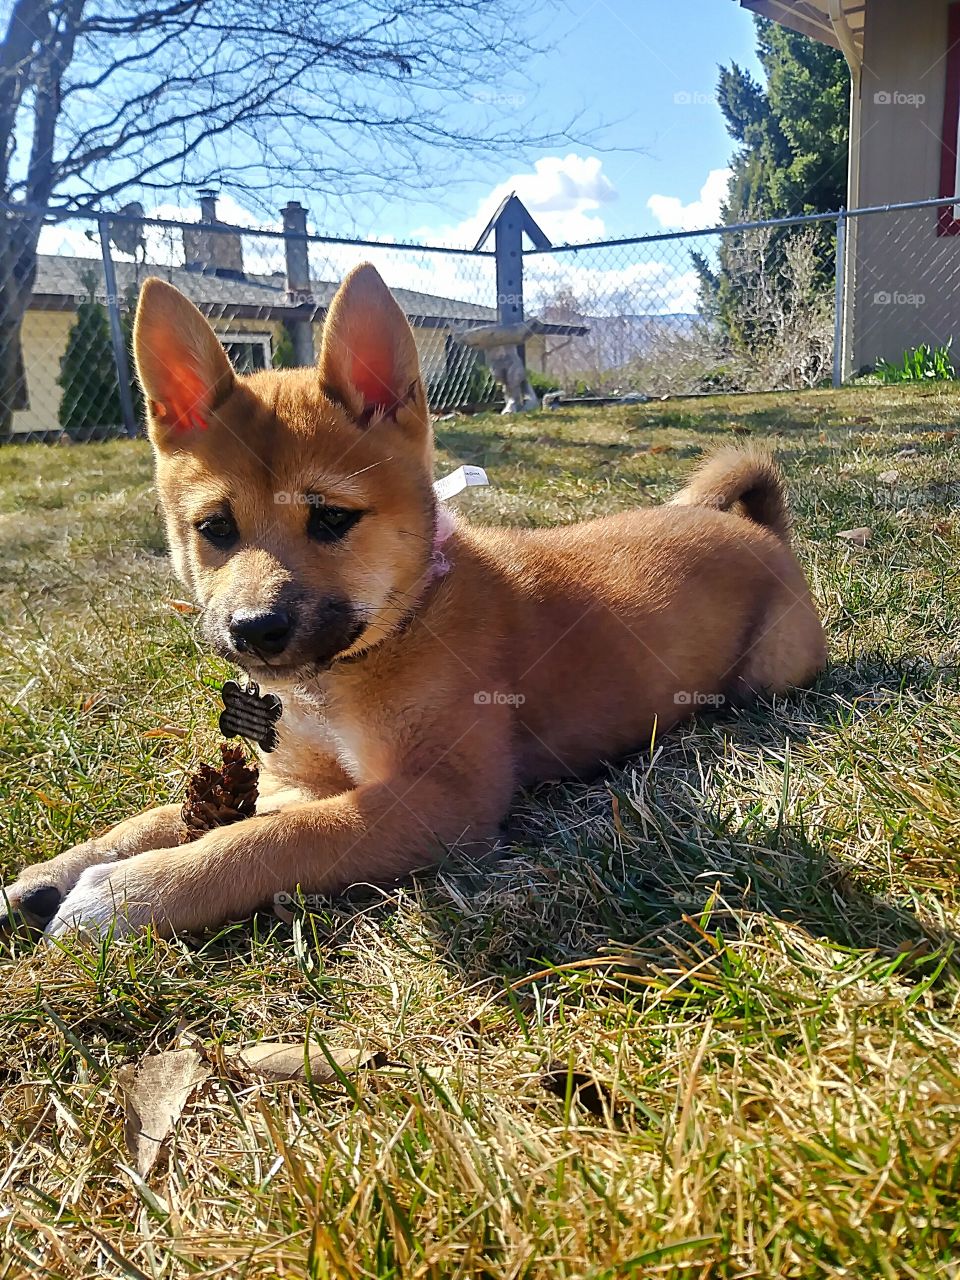 An adorable Shiba Inu pup playing with a pinecone outside